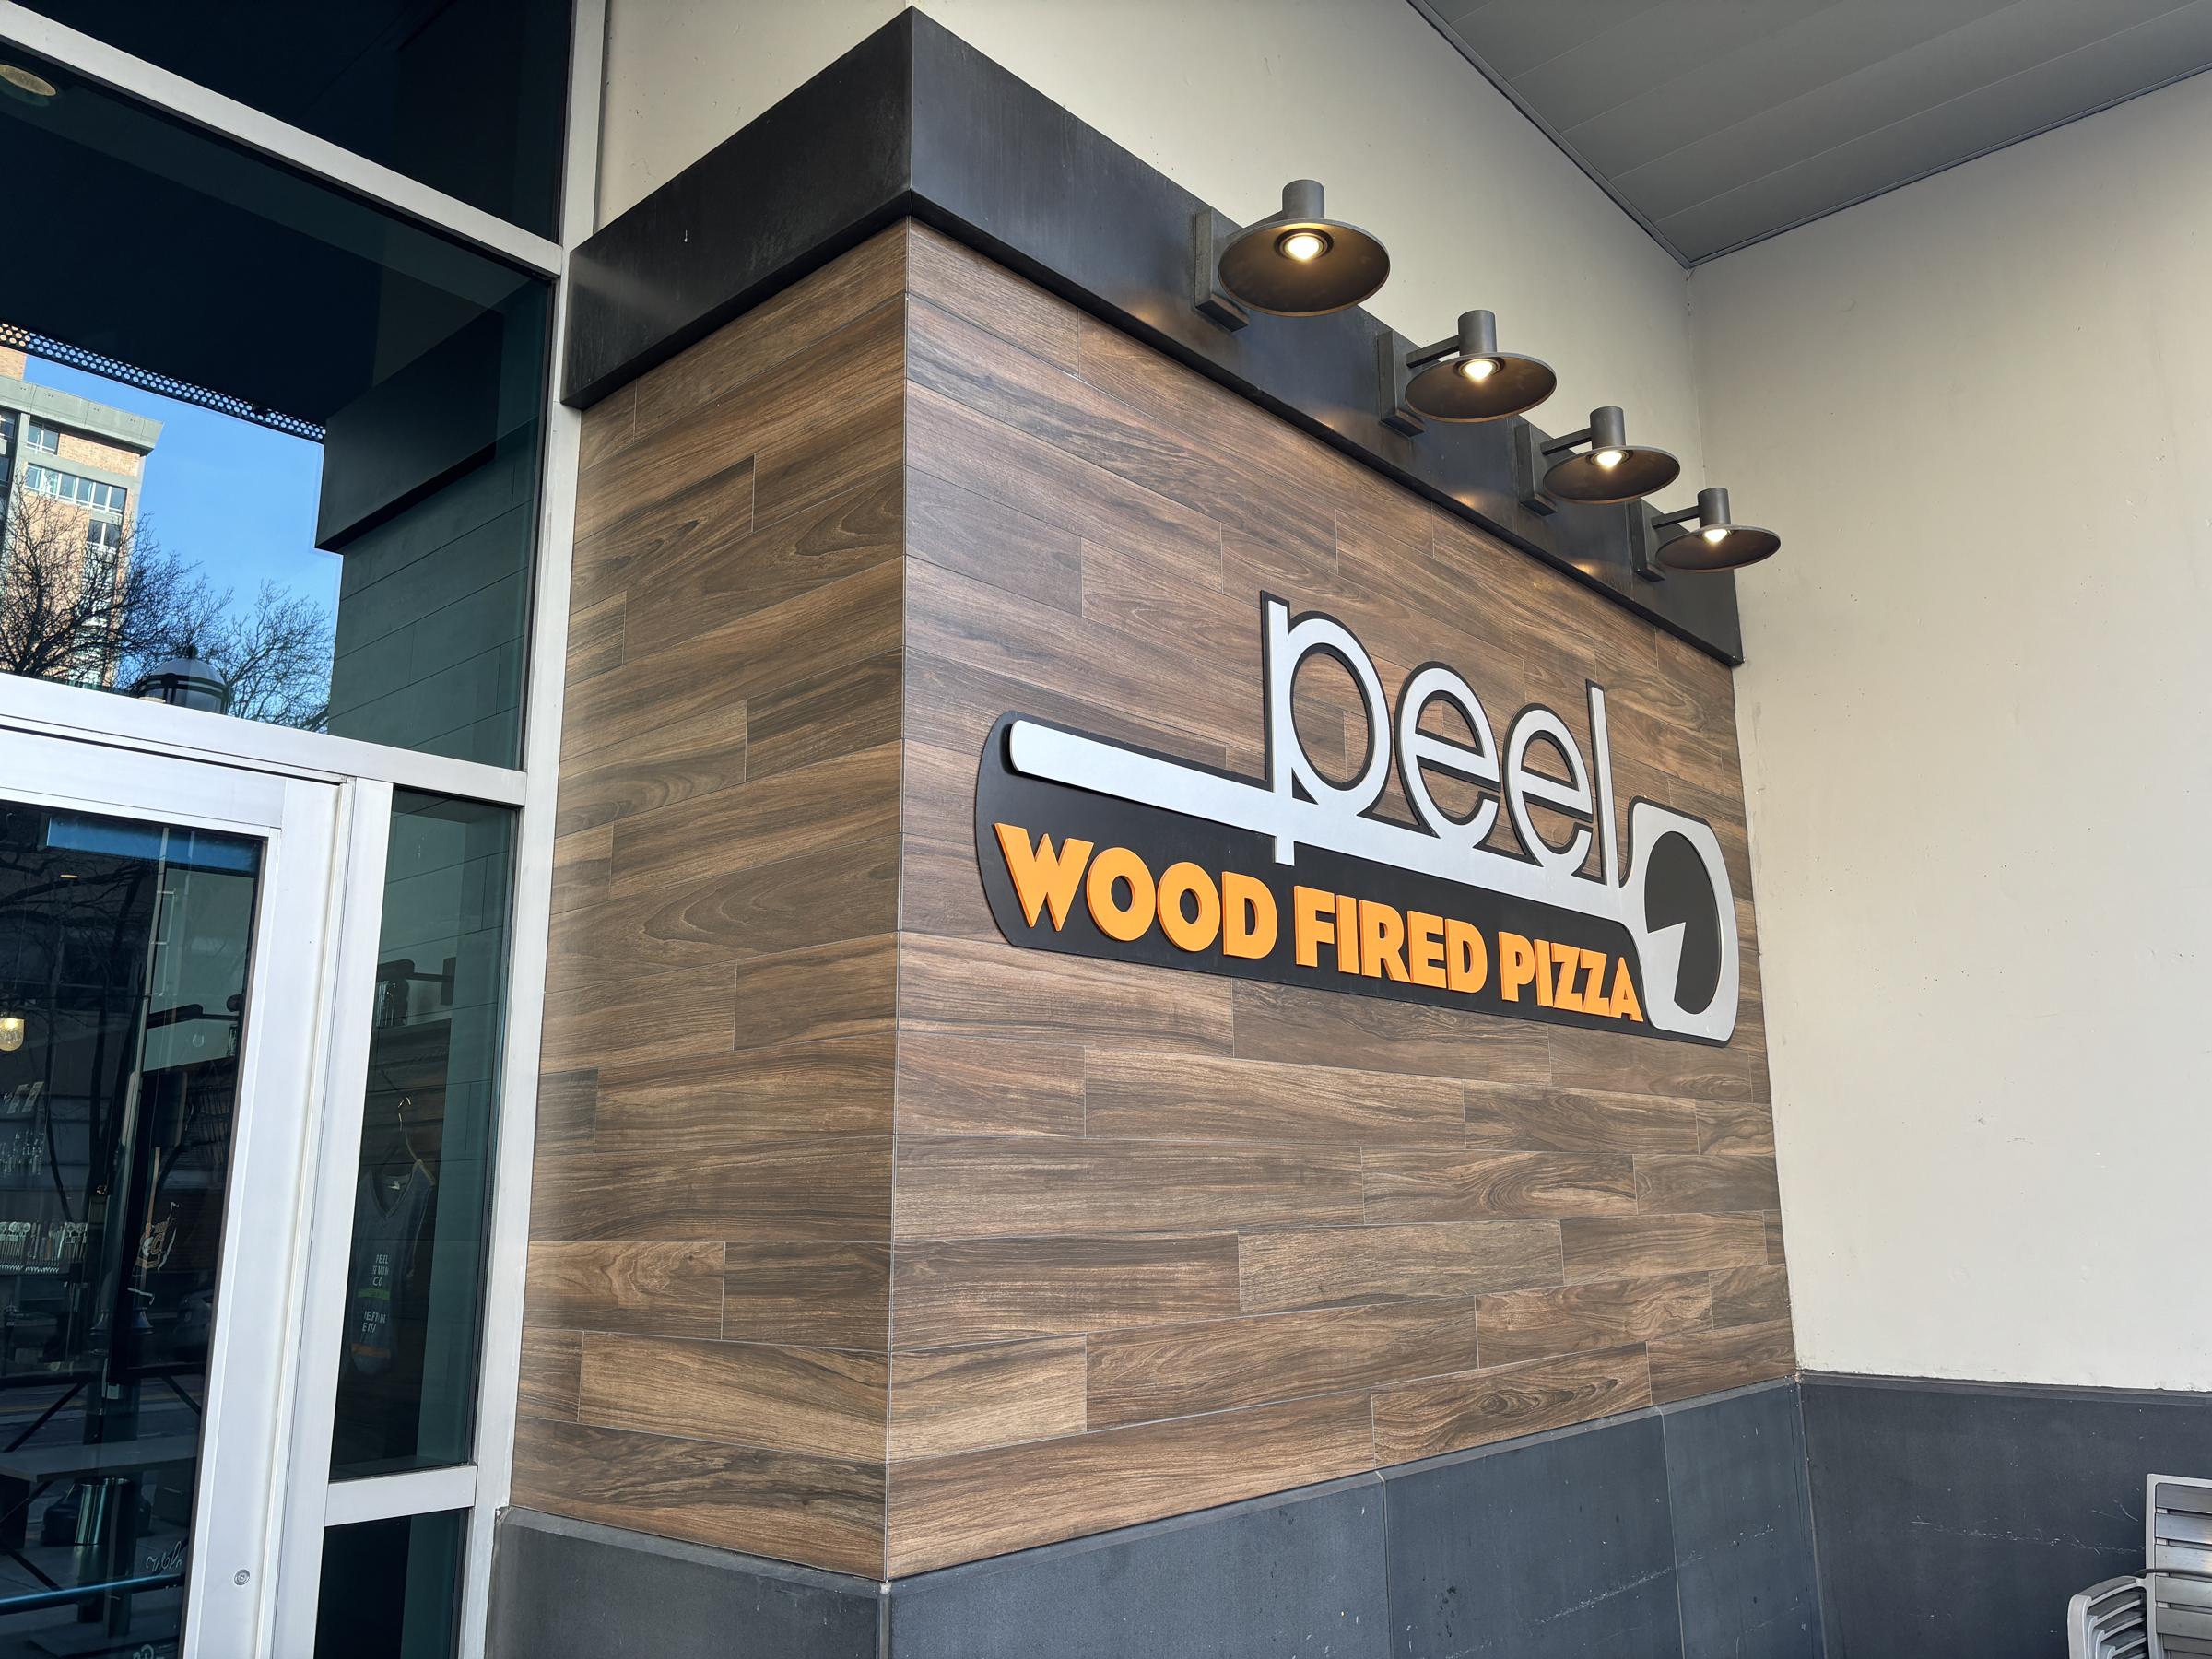 Peel Wood Fired Pizza signage